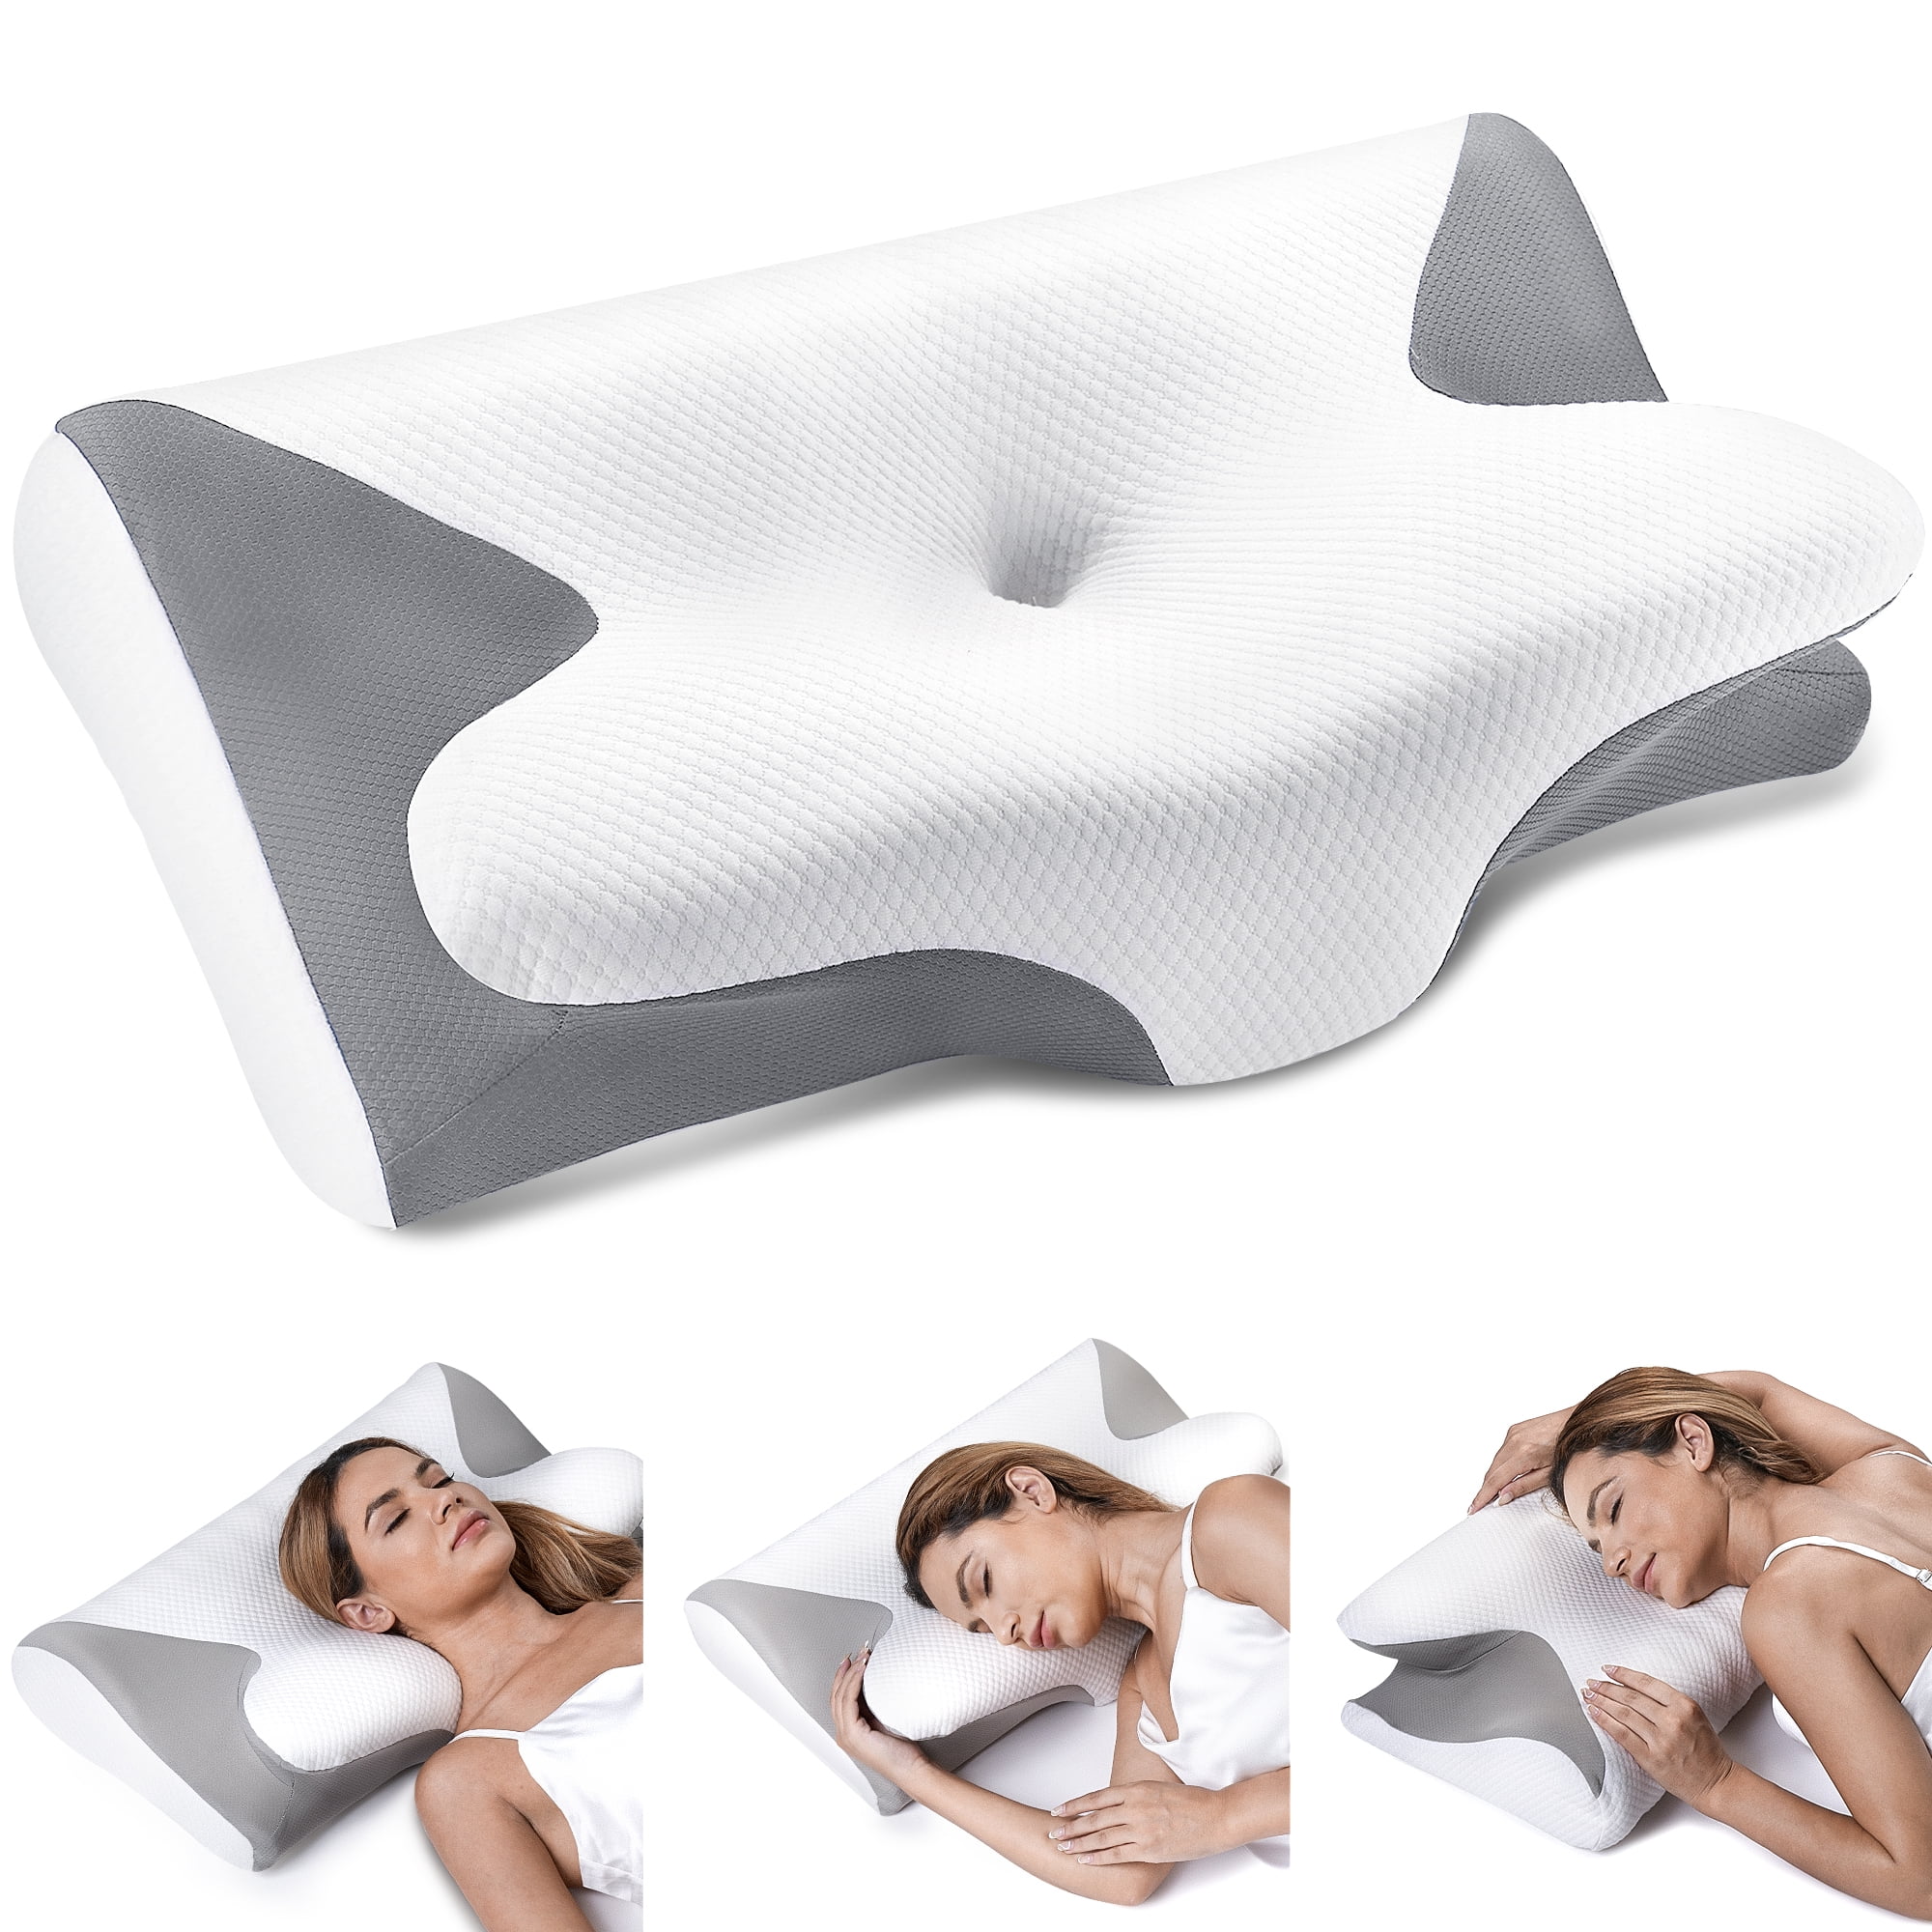  MDSWZAI Memory Foam Cervical Spine Pillow for Neck